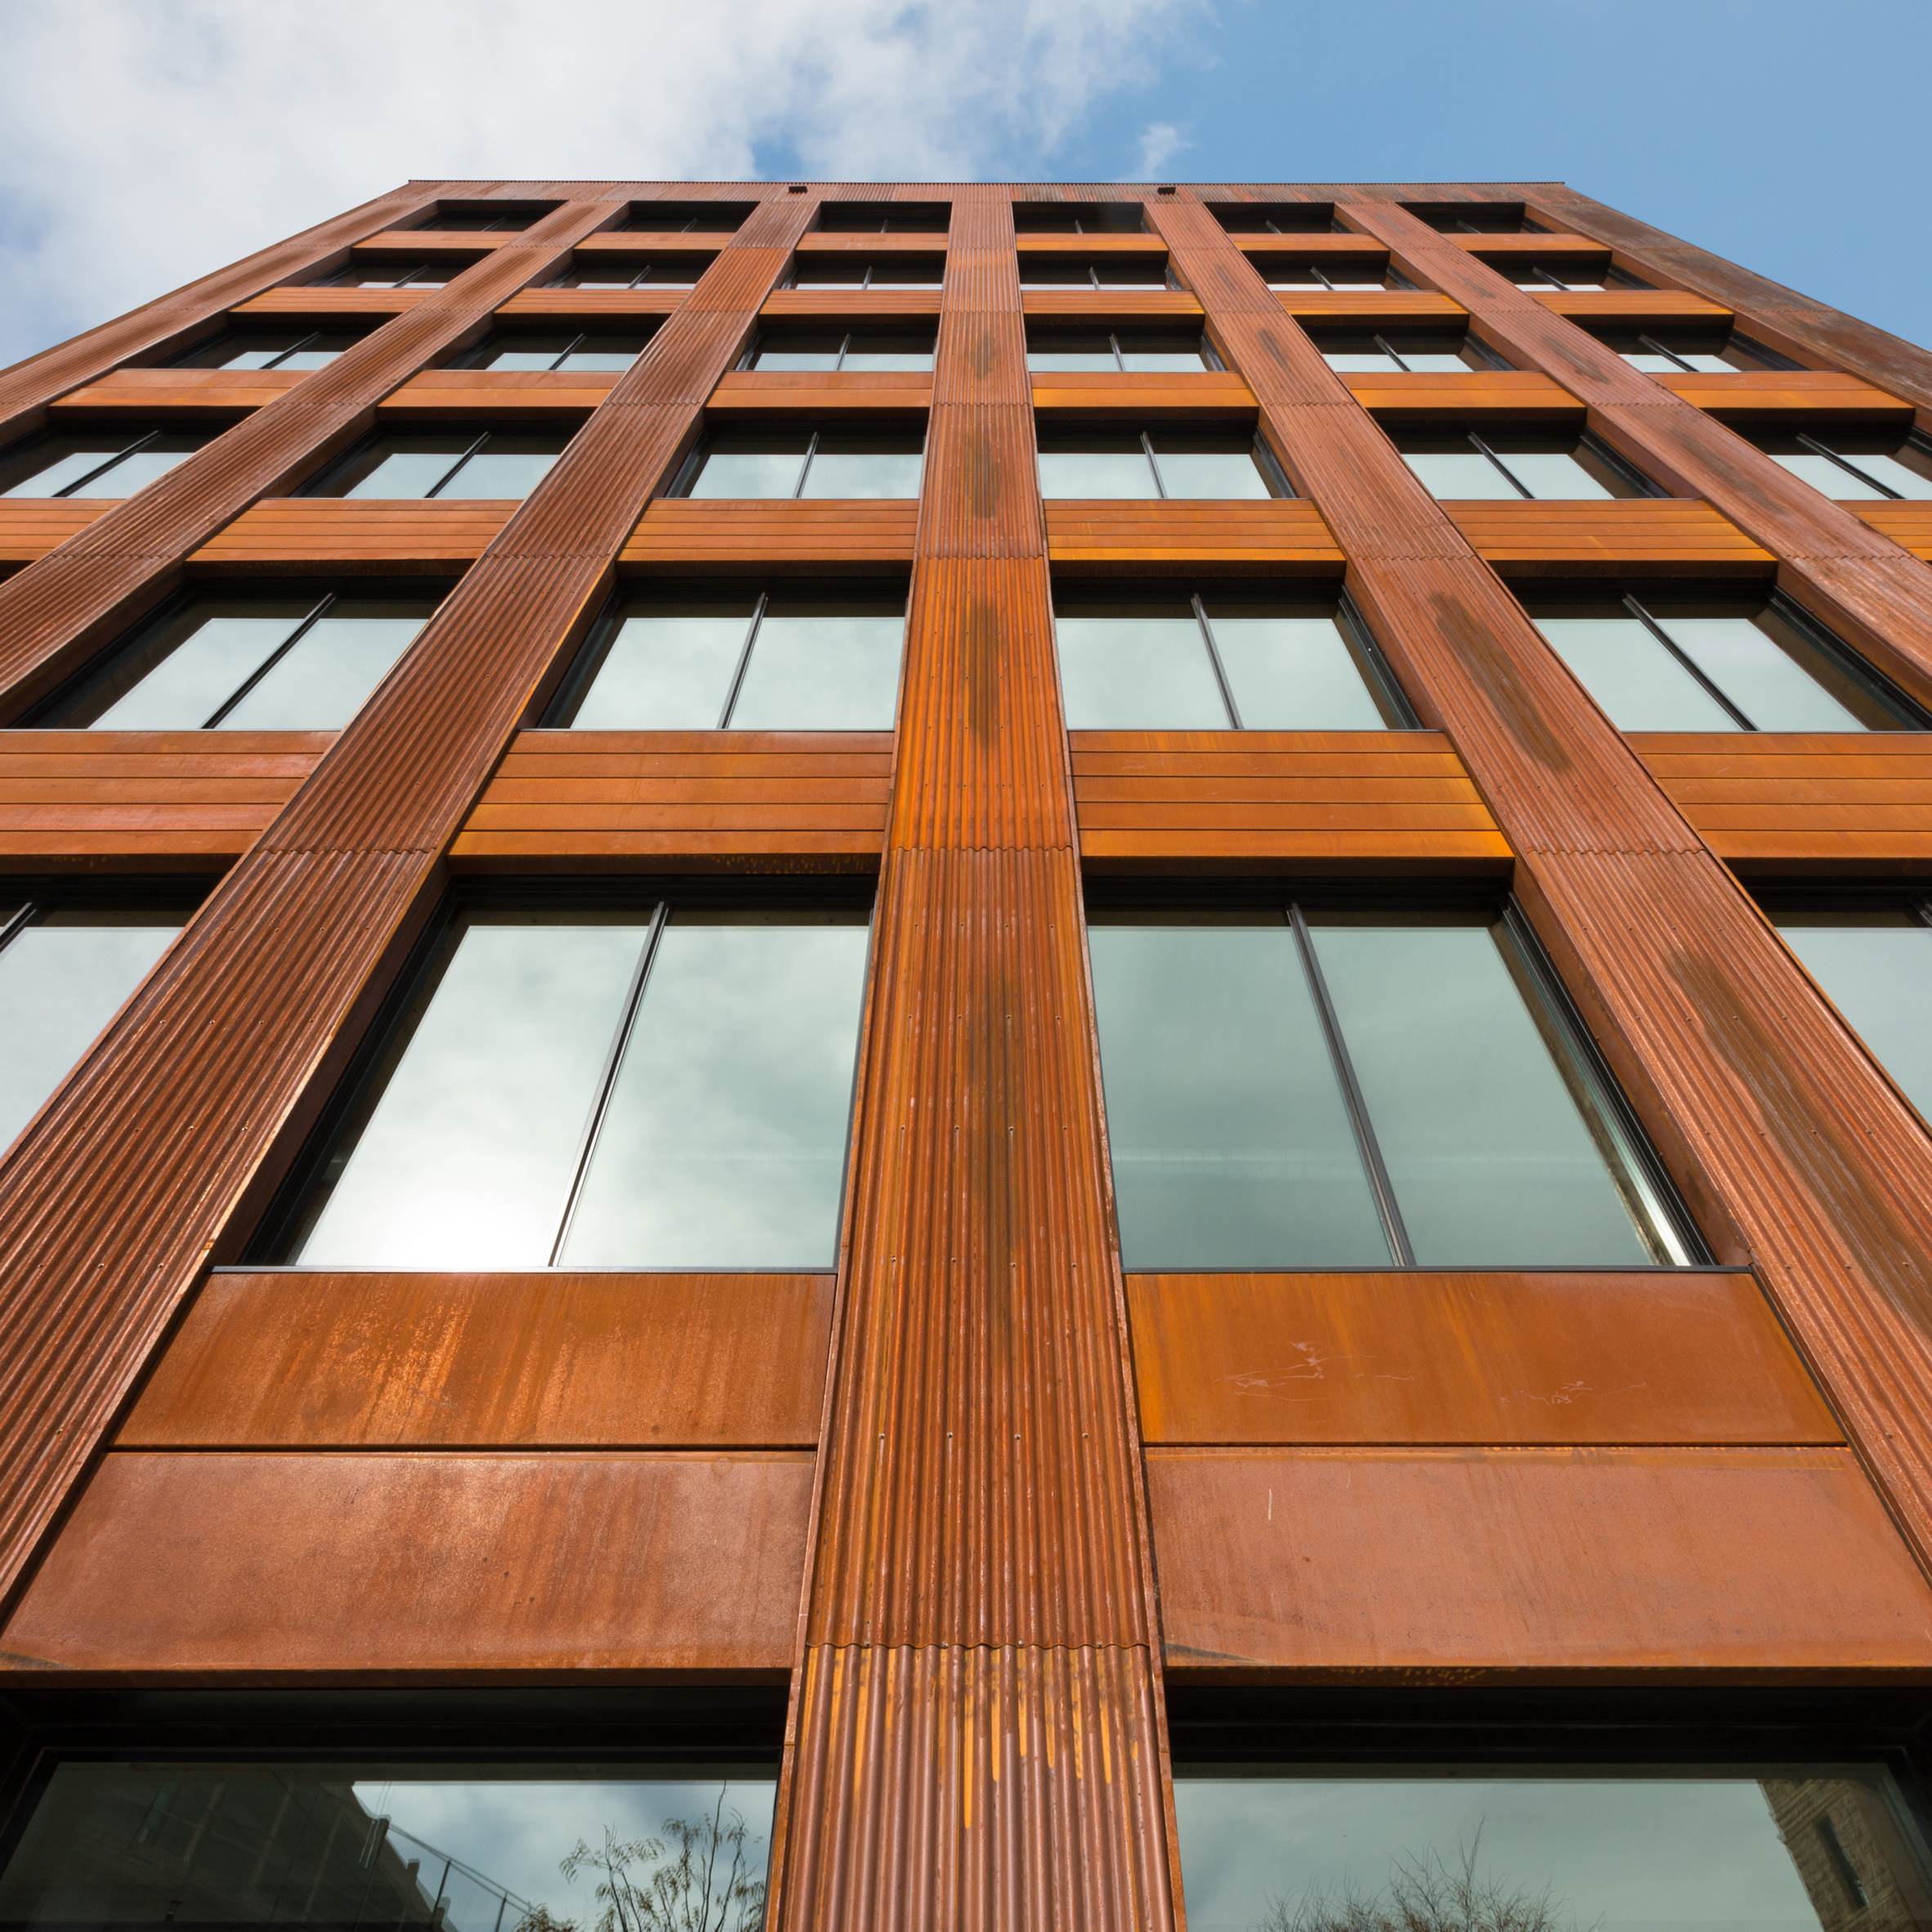 Michael Green completes largest mass-timber building in United States